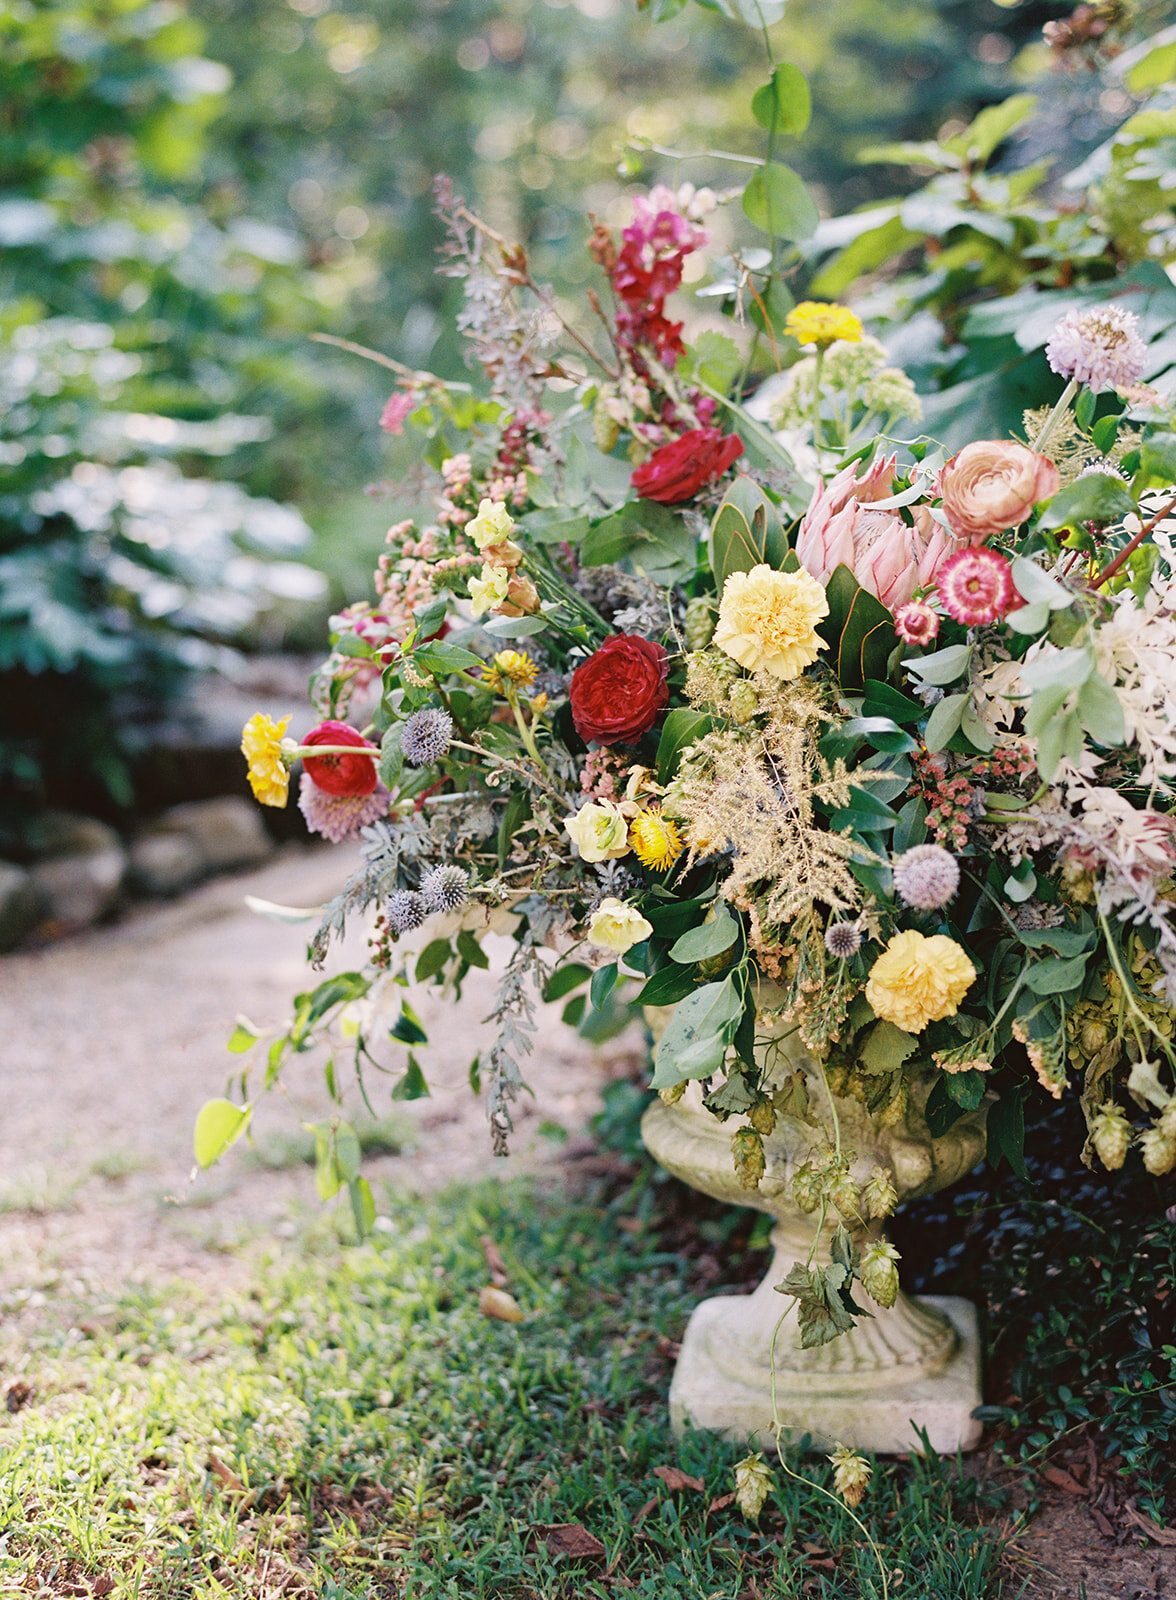 Large garden urn with an airy, natural flower arrangement of wildflowers in shades of coral, mauve, golden yellow, dusty blue, peach, and rosy pink. Nashville and Knoxville wedding floral designer at RT Lodge.